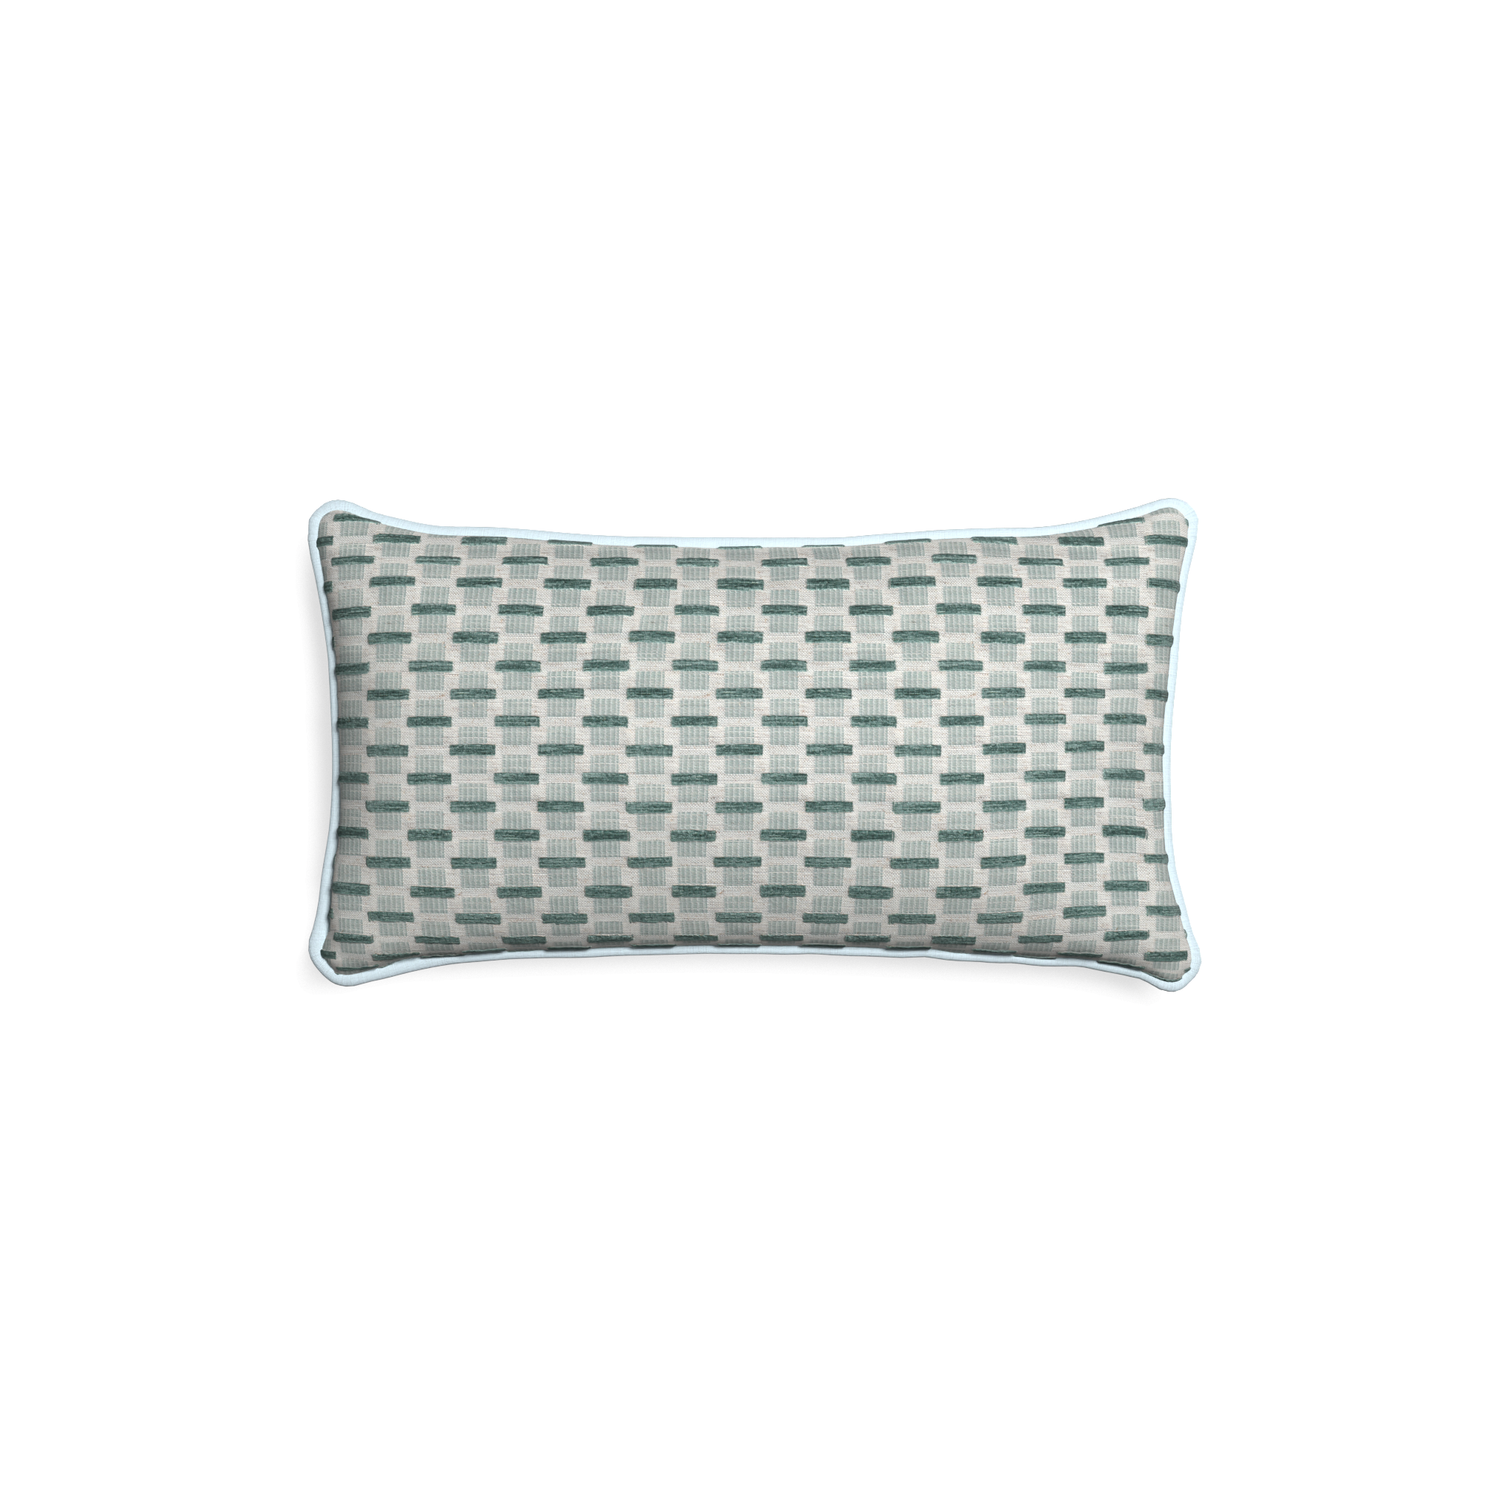 Petite-lumbar willow mint custom green geometric chenillepillow with powder piping on white background